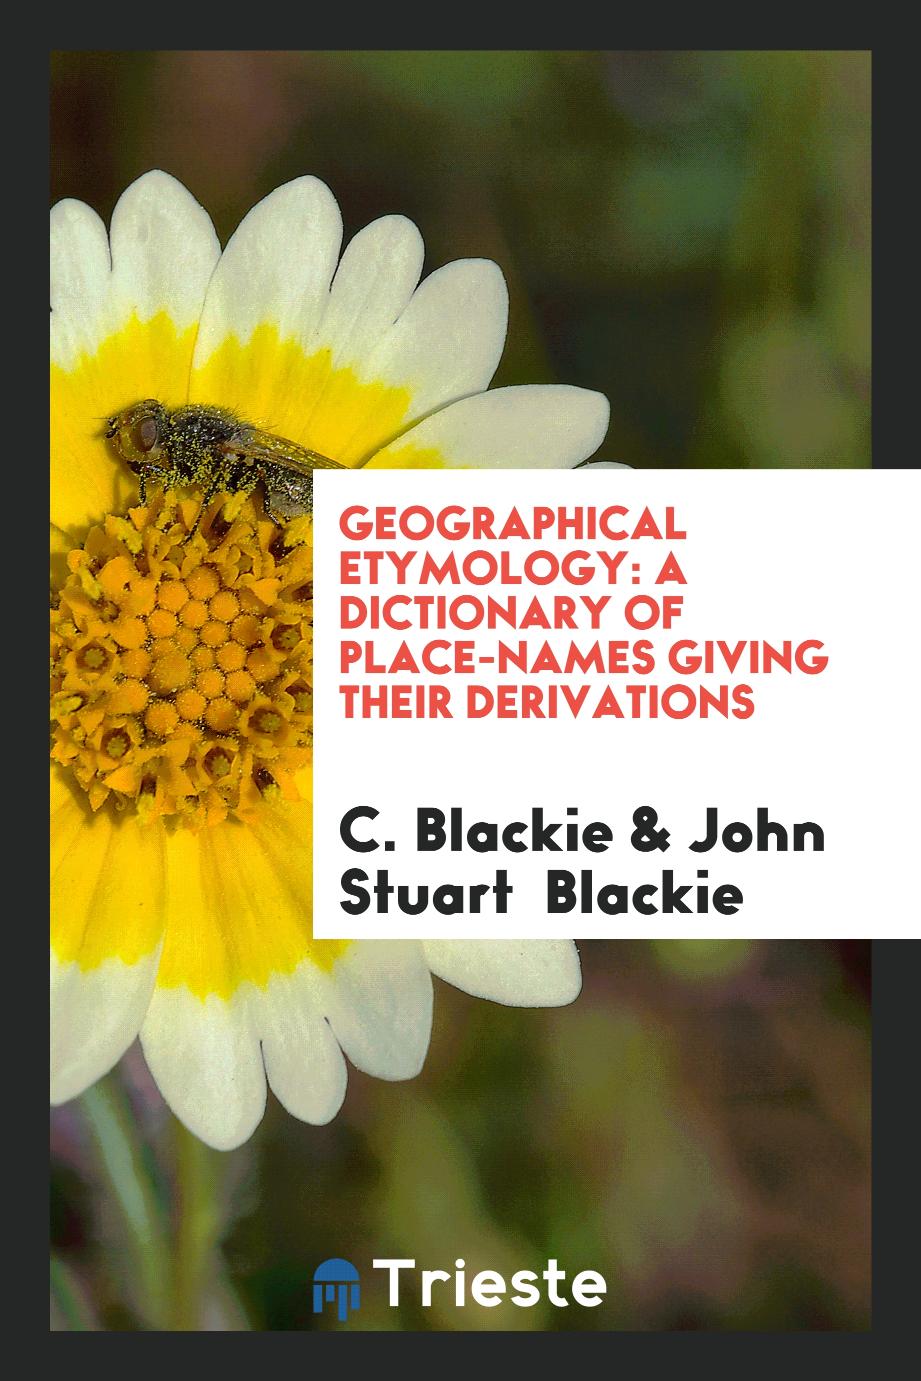 Geographical Etymology: A Dictionary of Place-Names Giving Their Derivations